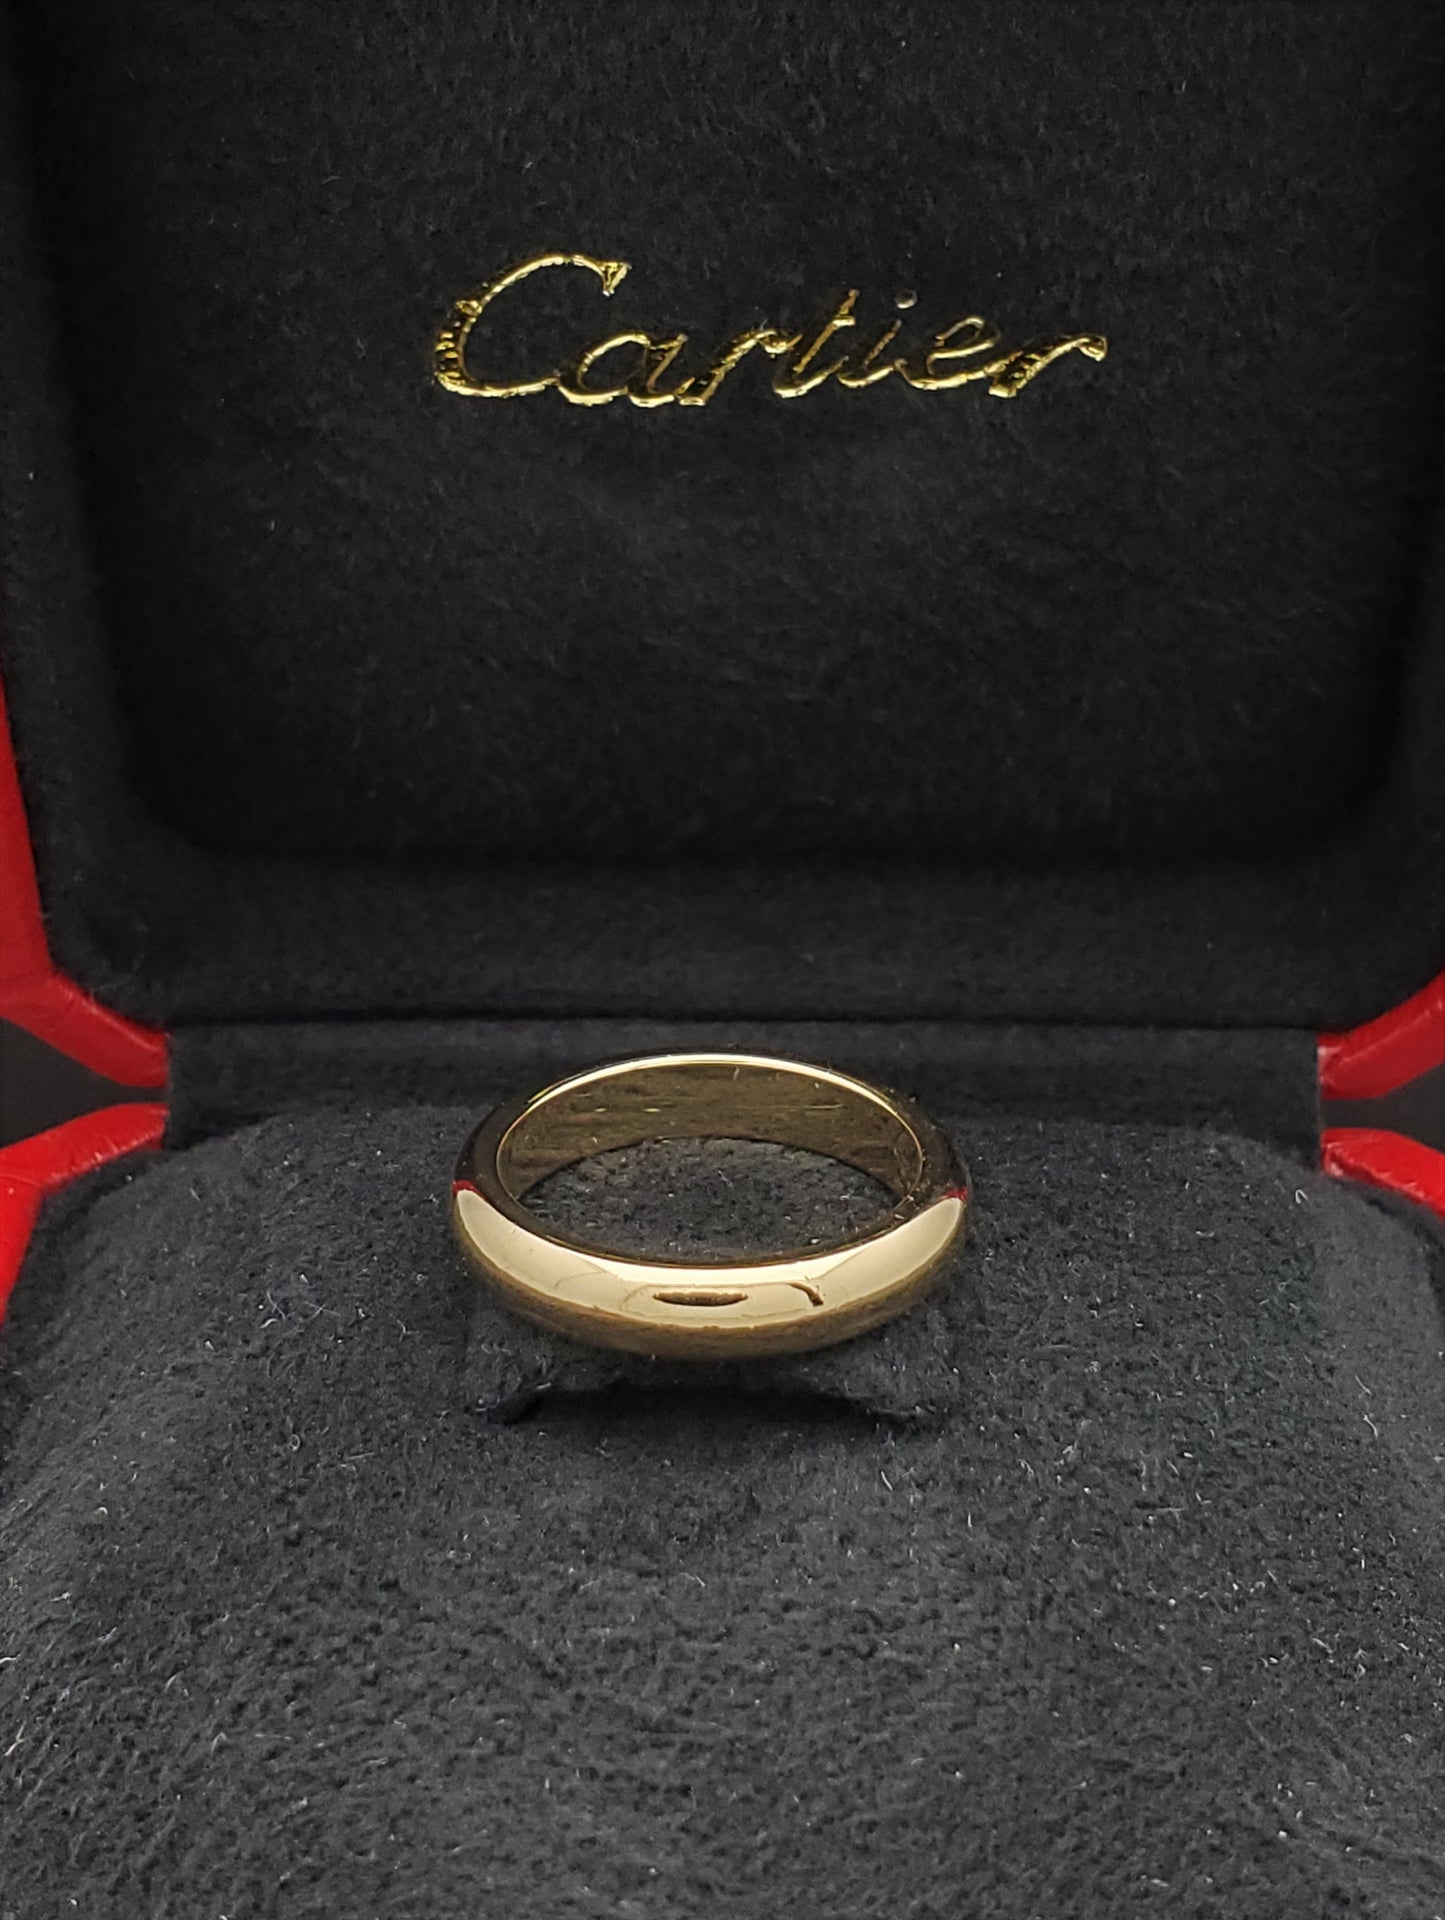 Cartier wedding band | Dream engagement rings, Emerald engagement ring cut, Wedding  bands